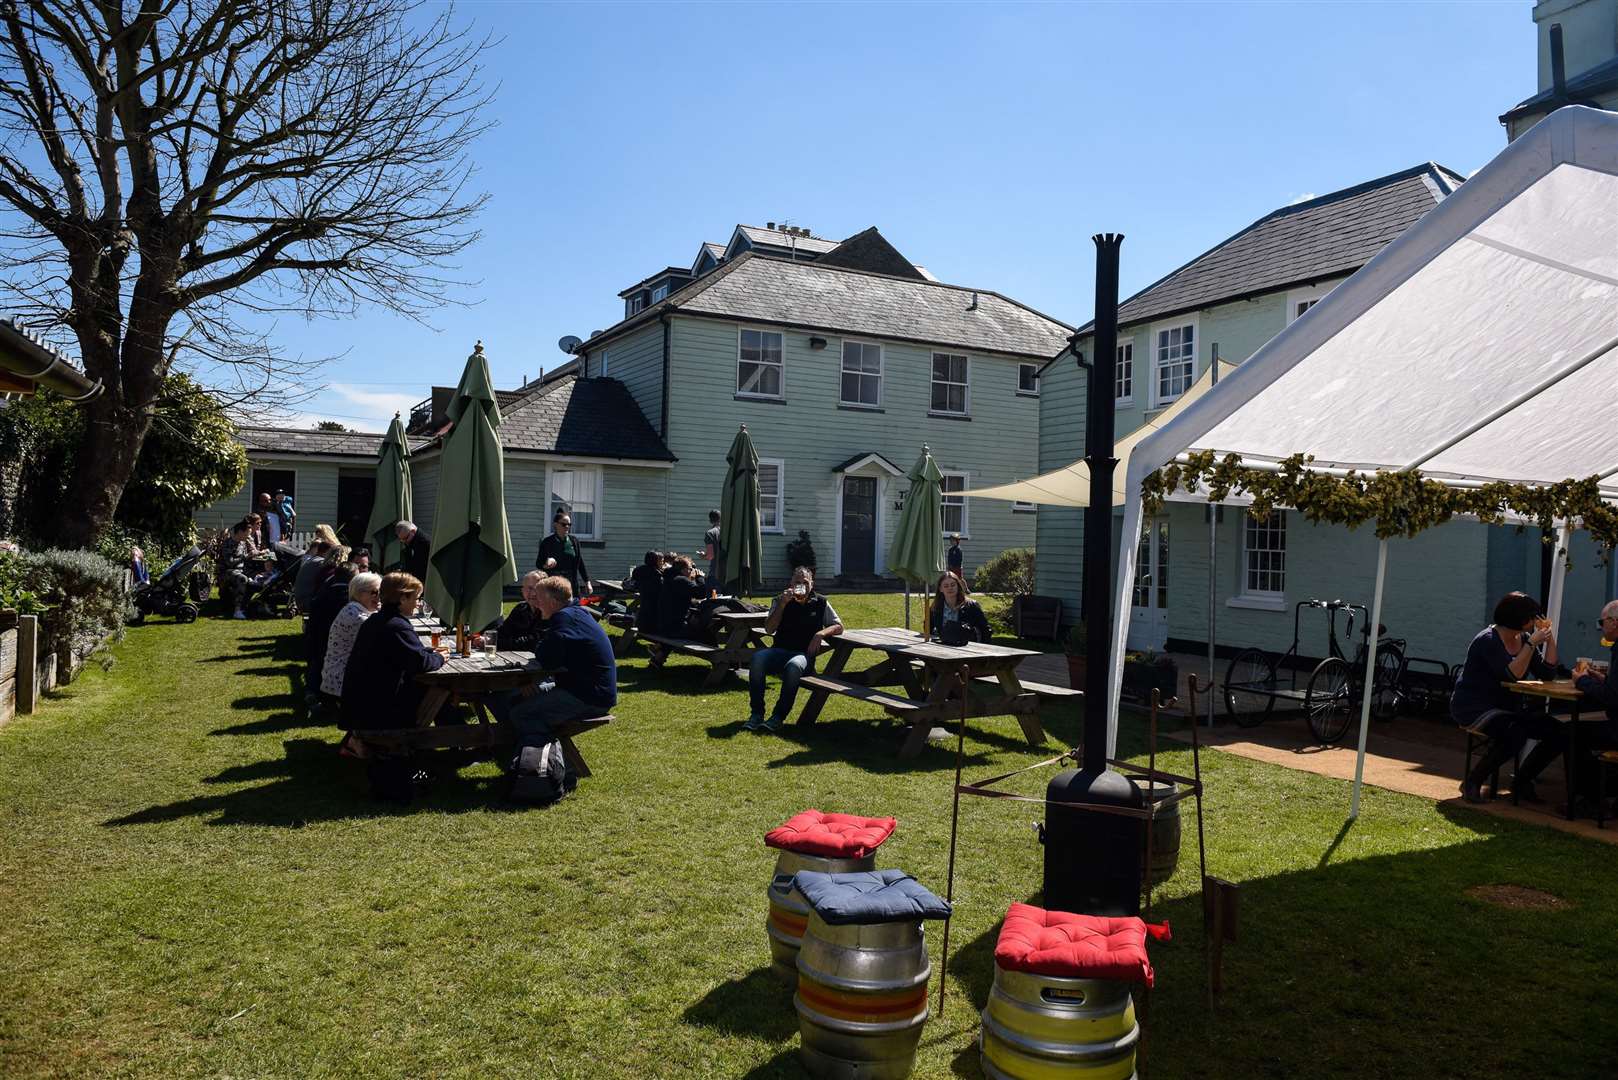 The White Cliffs Hotel hosted a beer and bread festival in 2016. Picture: Alan Langley